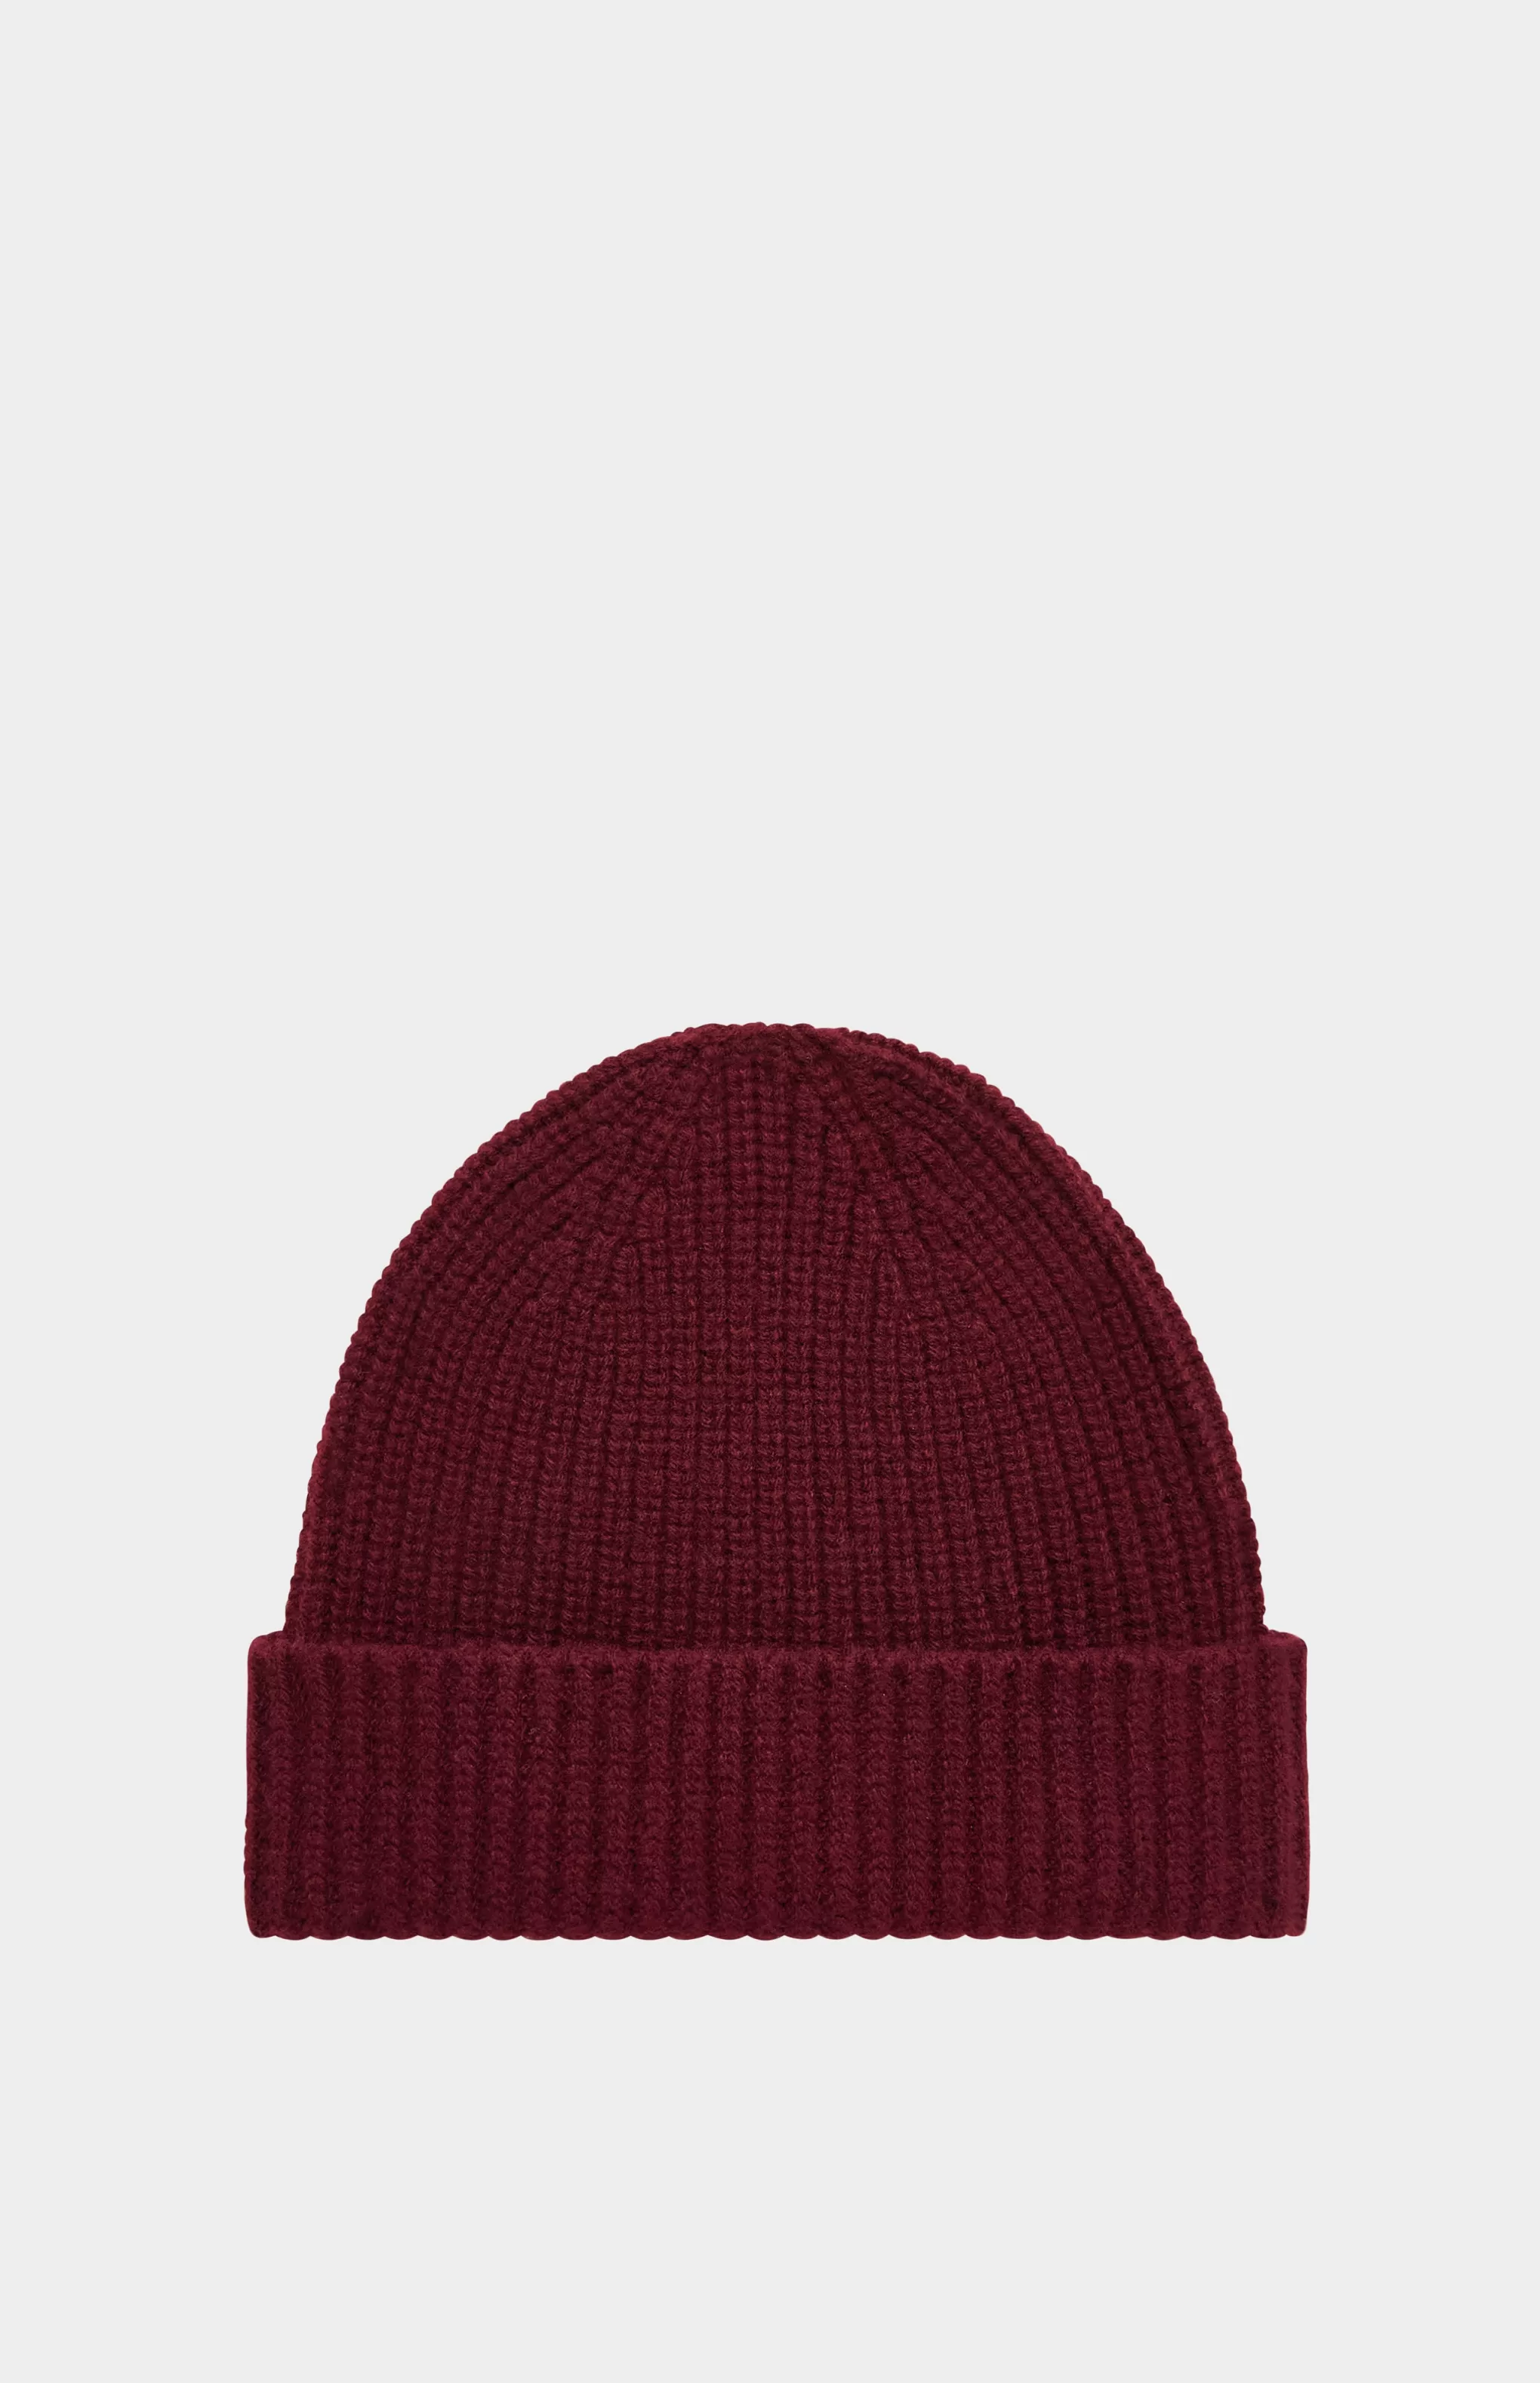 Cheap Lambswool Beanie In Deep Claret Men Conscious Collection